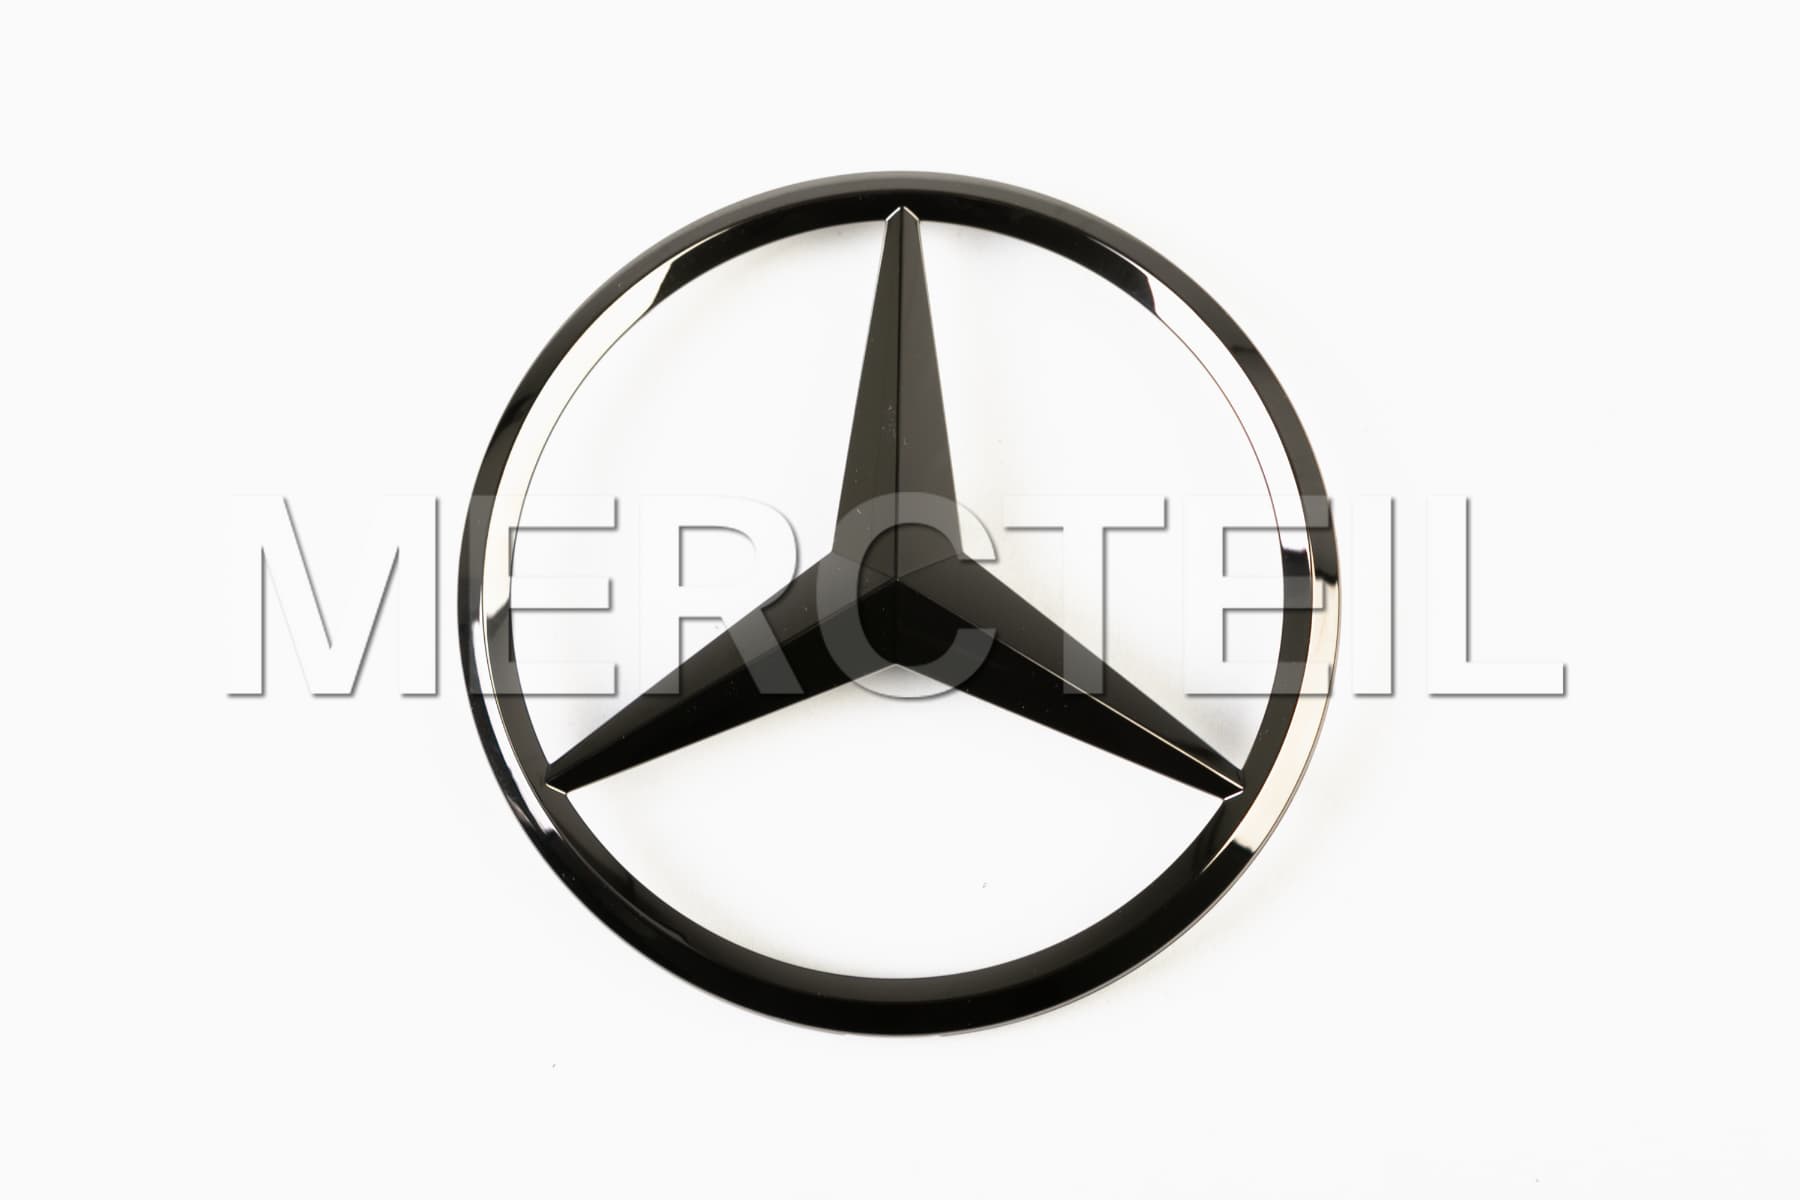 A-Class Hatchback Trunk Star Badge - Black Night Package W177